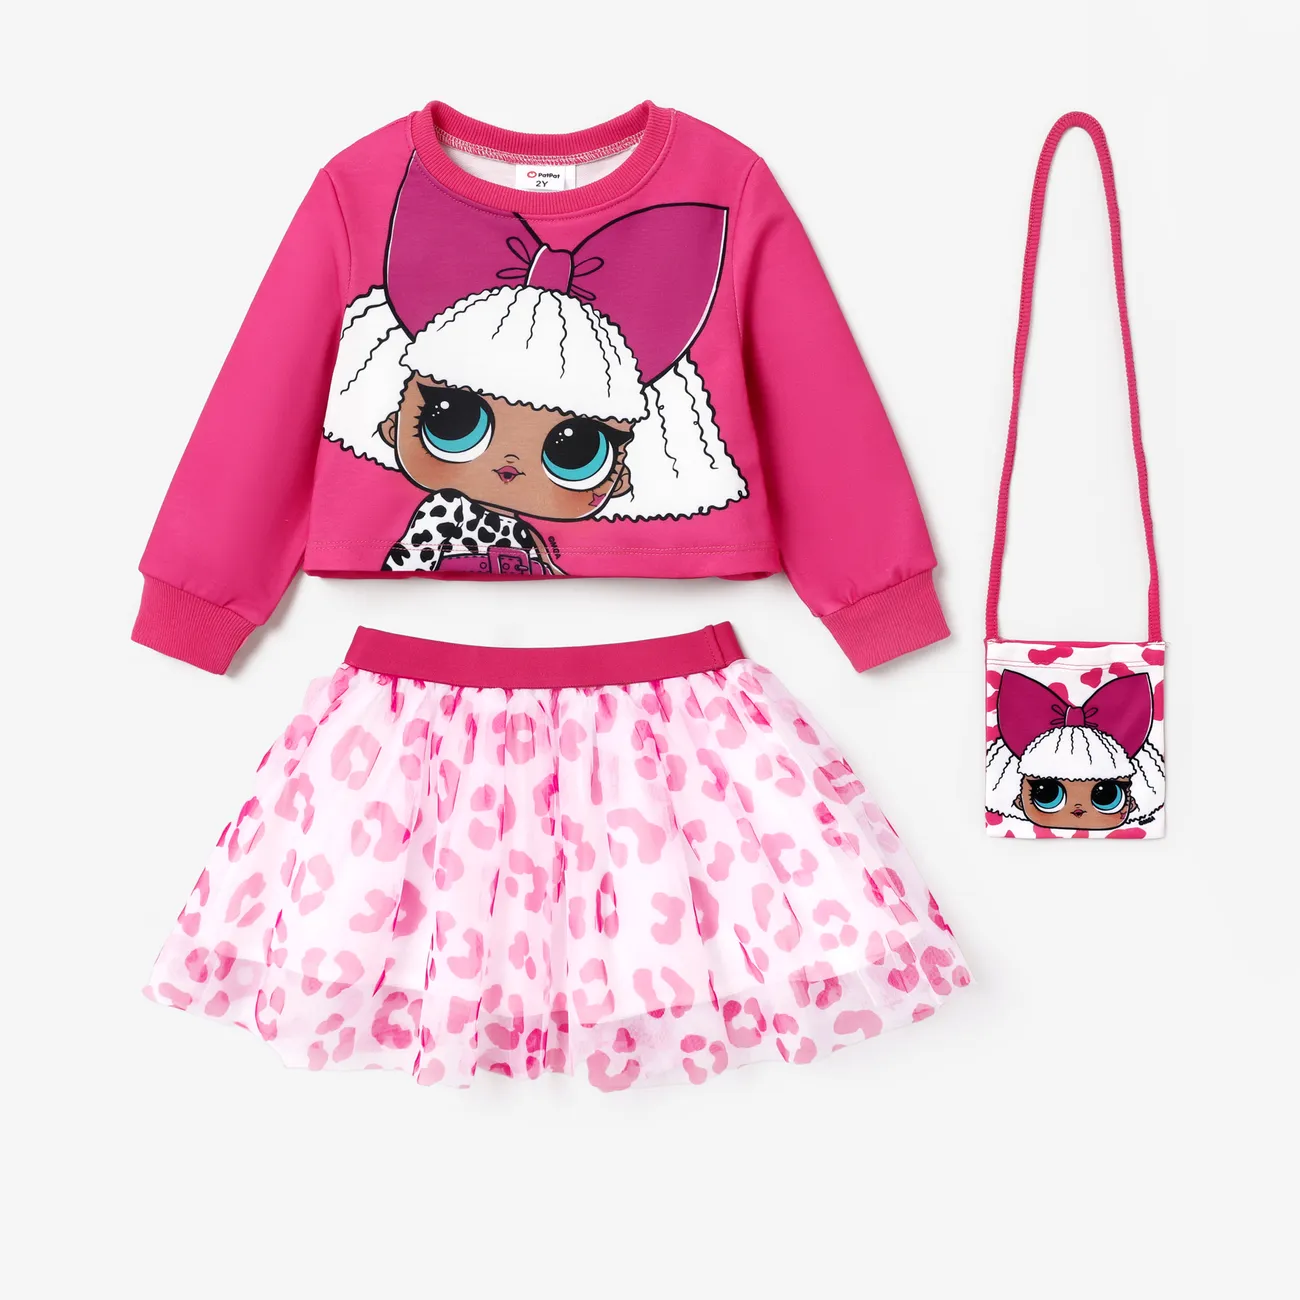 L.O.L. SURPRISE! Toddler Girl Glitter Hem Character Pattern Top with Crossbody Bag Skirt Suit  Peach* big image 1